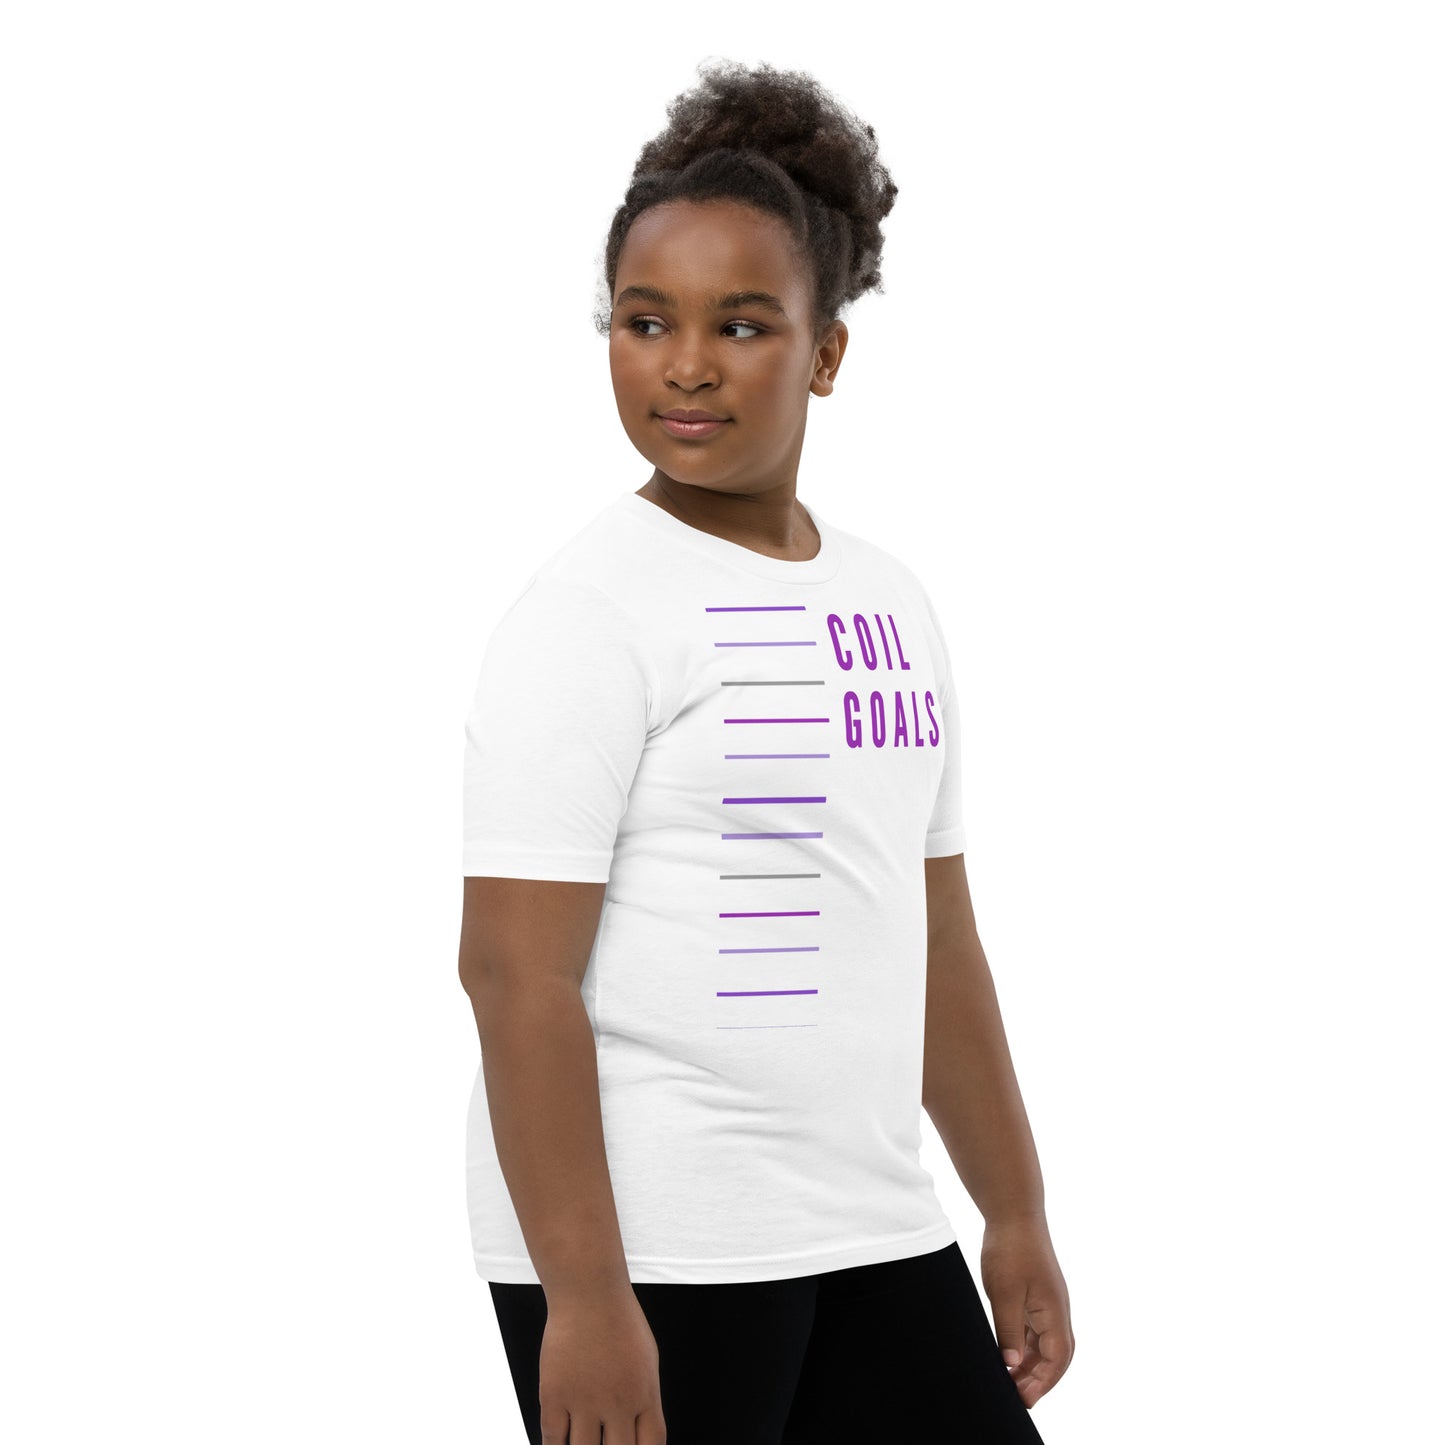 Youth Ultimate Coil Goals Tee